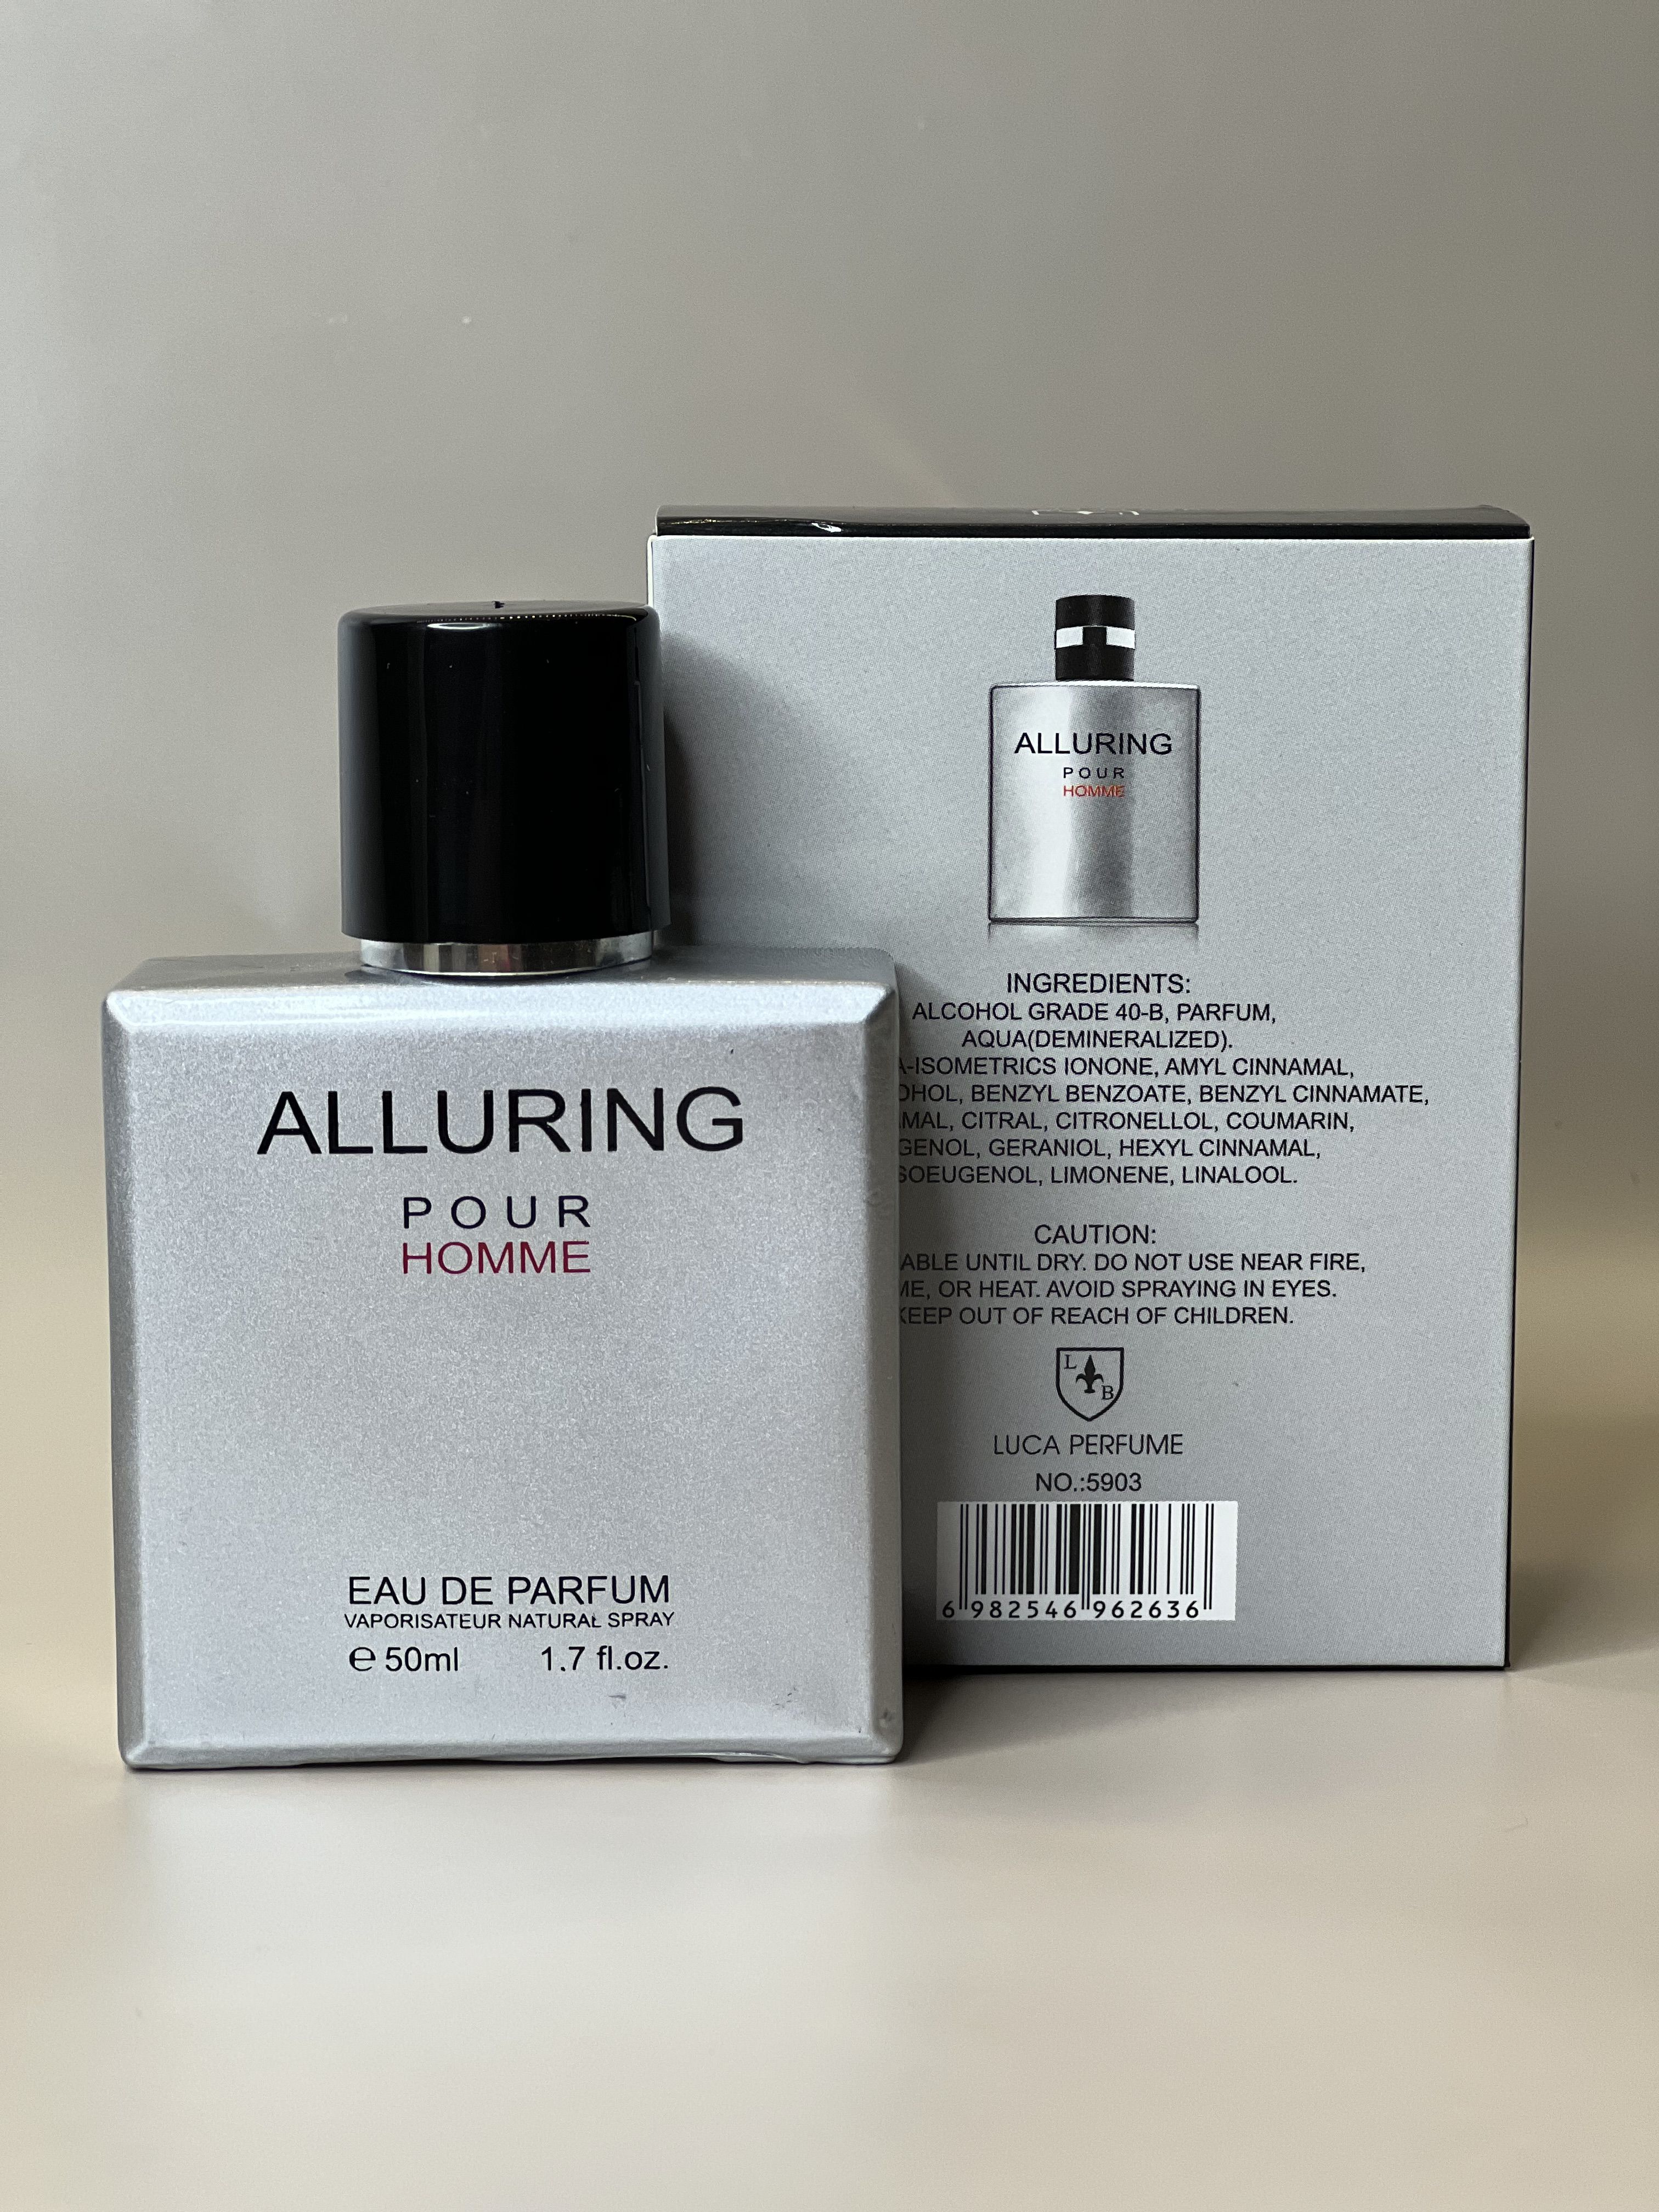 Alluring pour homme. Набор Allyra Sport pour homme 2 по 65 мл. Аллюр хом. Аллюр хом спорт. Allure Sport pour.